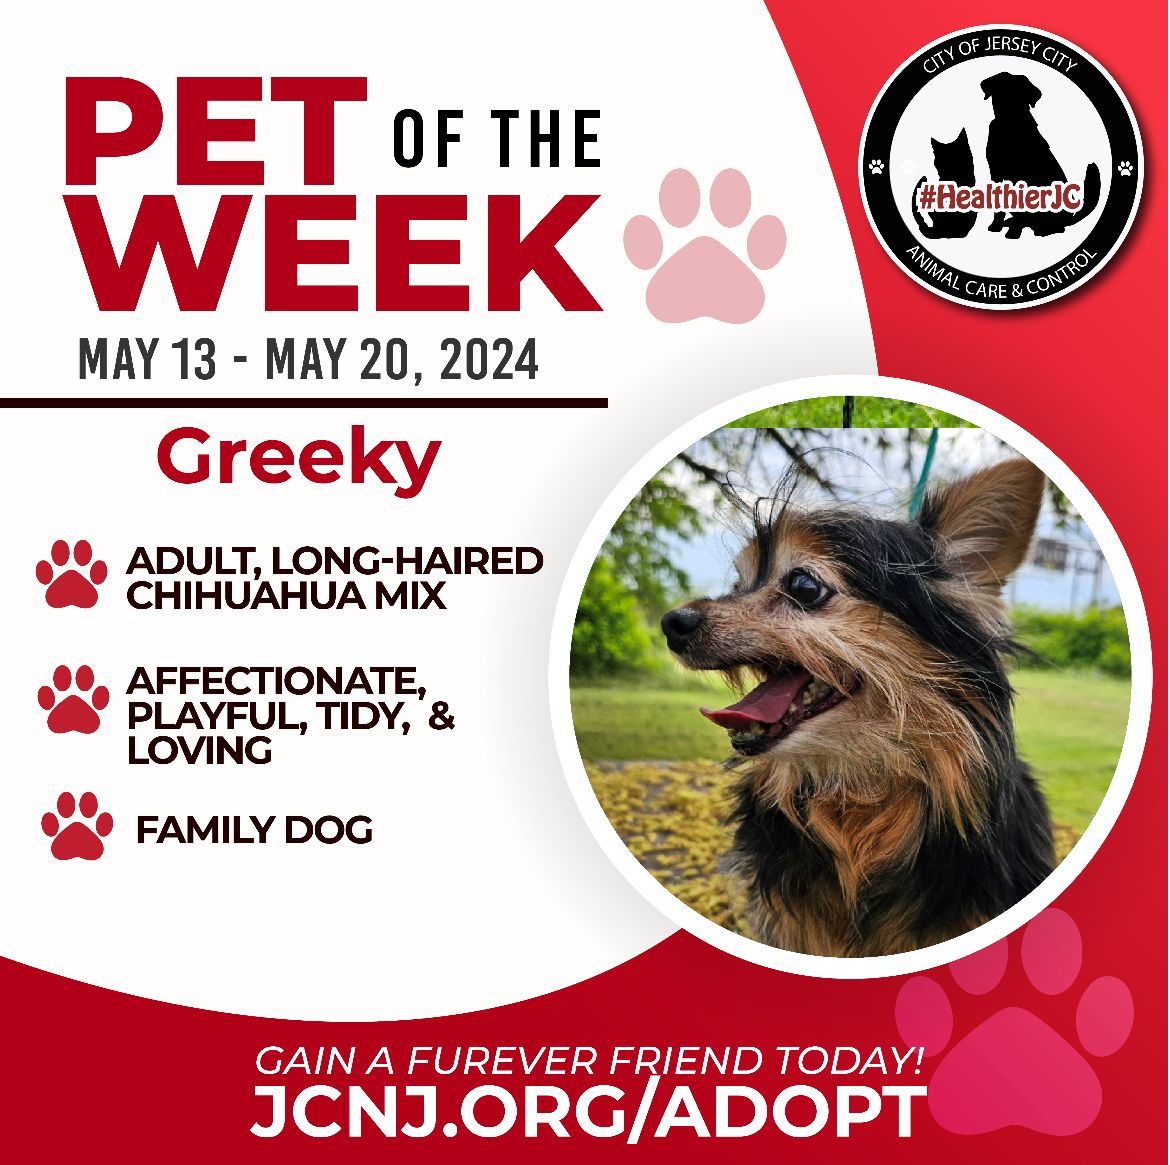 🐾 Meet Greeky, our adorable Healthier JC pet of the week! 🐶 If you're considering adding a furry friend to your family, why not consider adopting Greeky? Gain a furever friend today at jcnj.org/adopt #AdoptDontShop #JerseyCity #HealthierJC